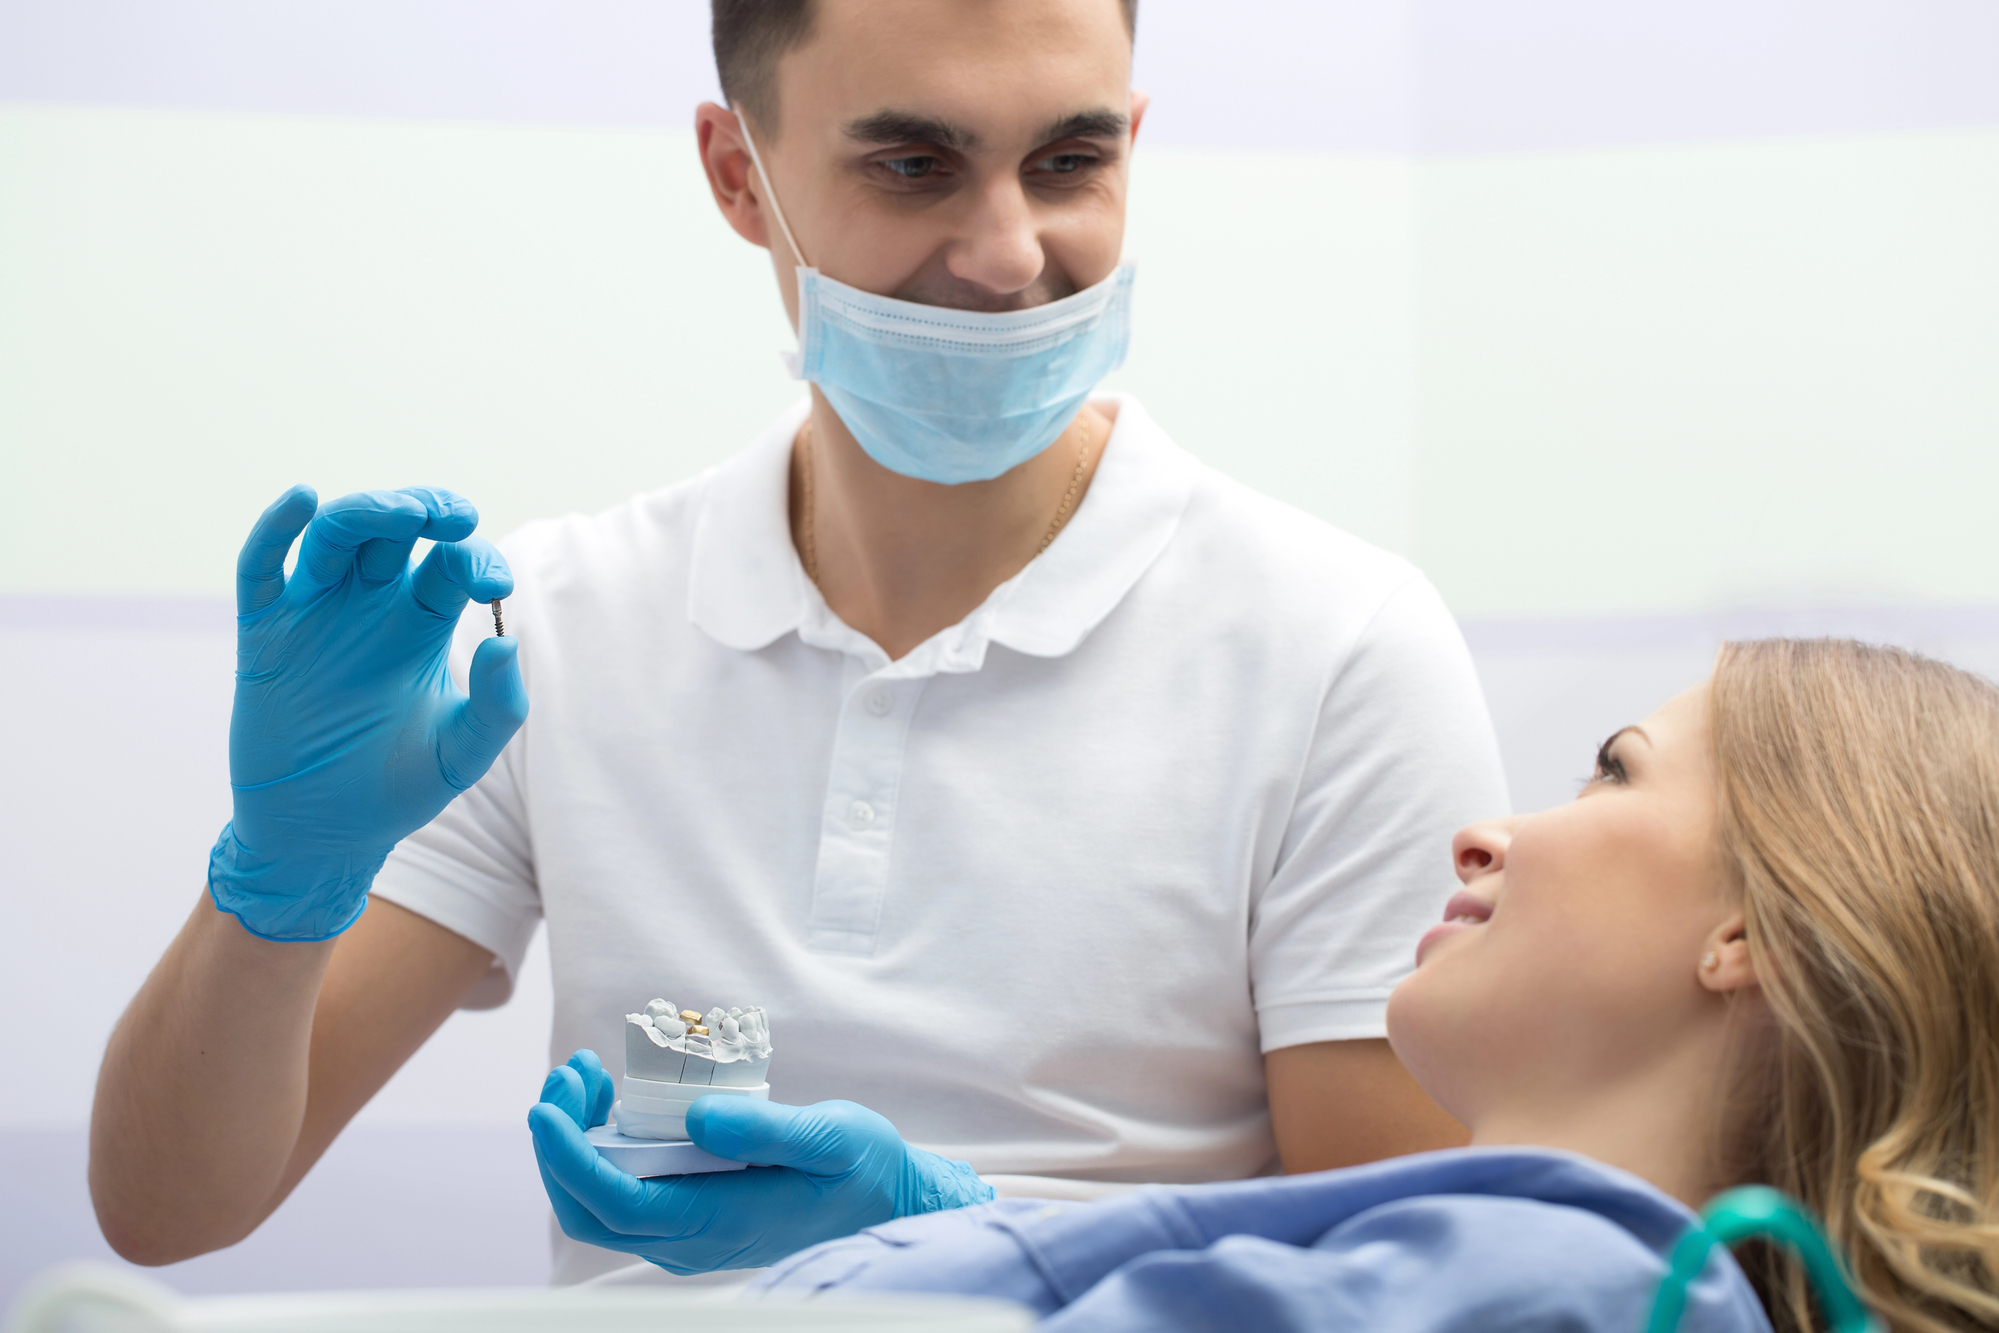 Tooth extraction and implant on the same day: what to expect